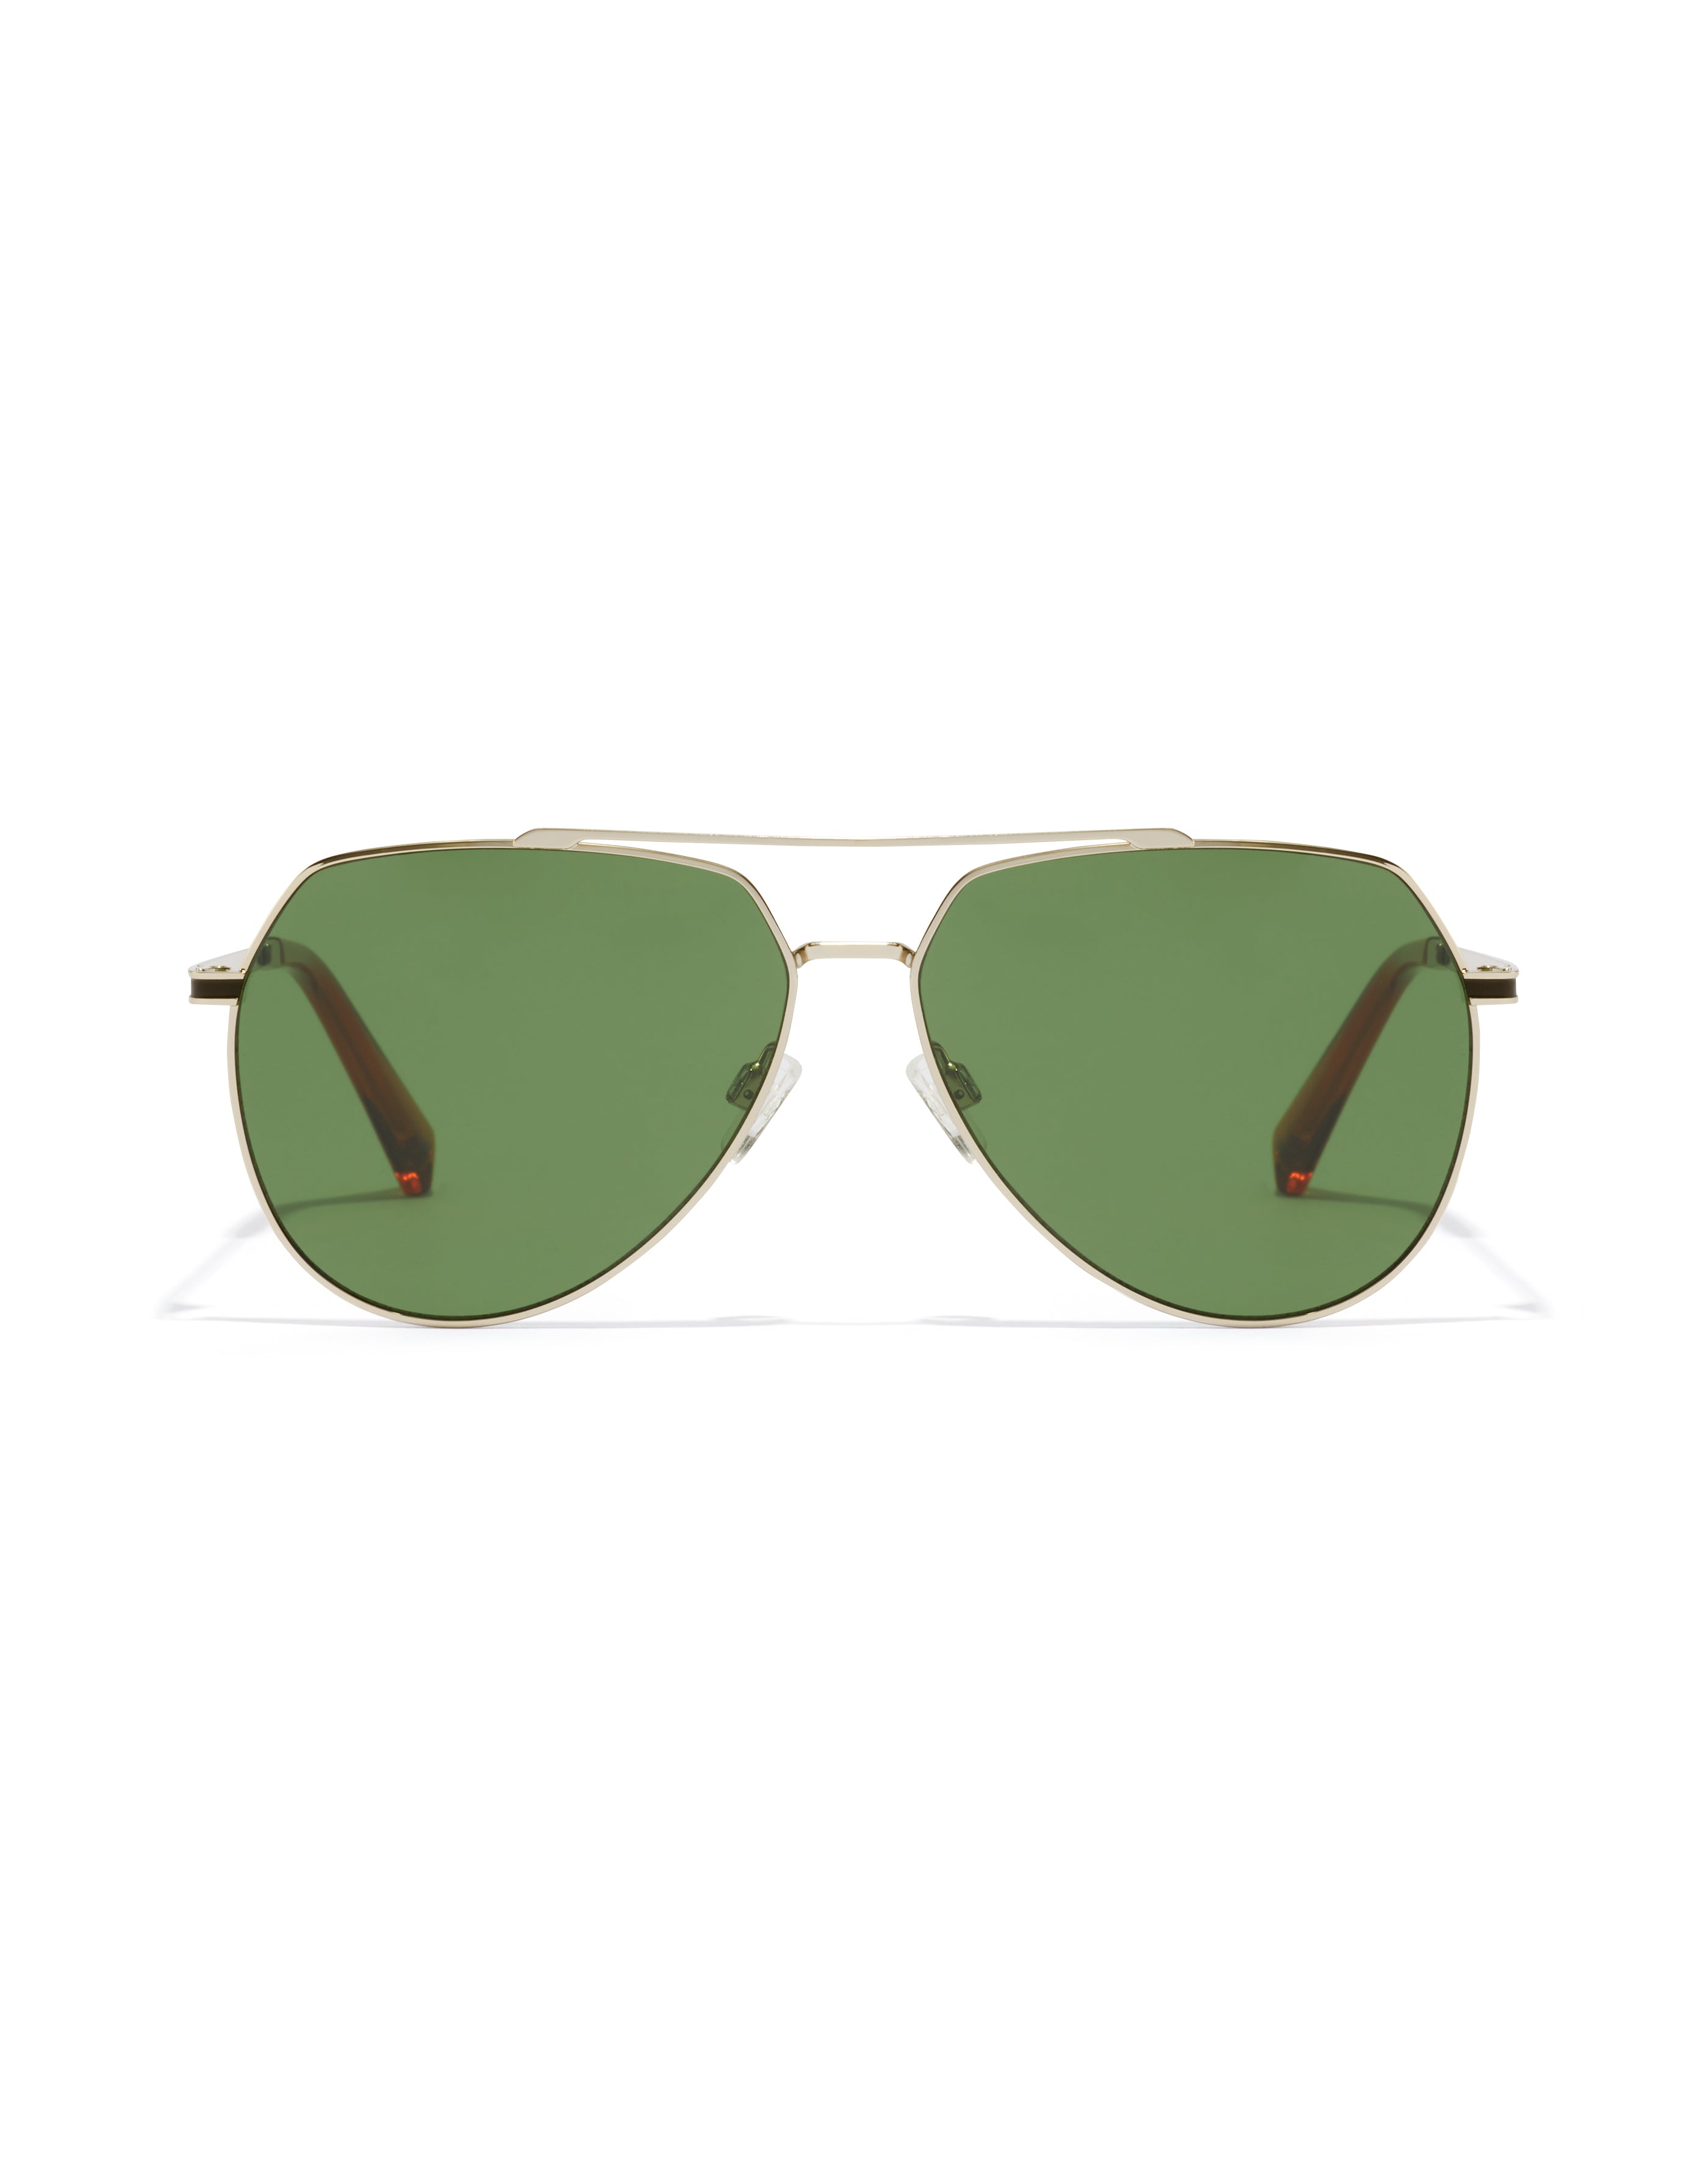 HAWKERS - SHADOW POLARIZED Green For Men and Women UV400